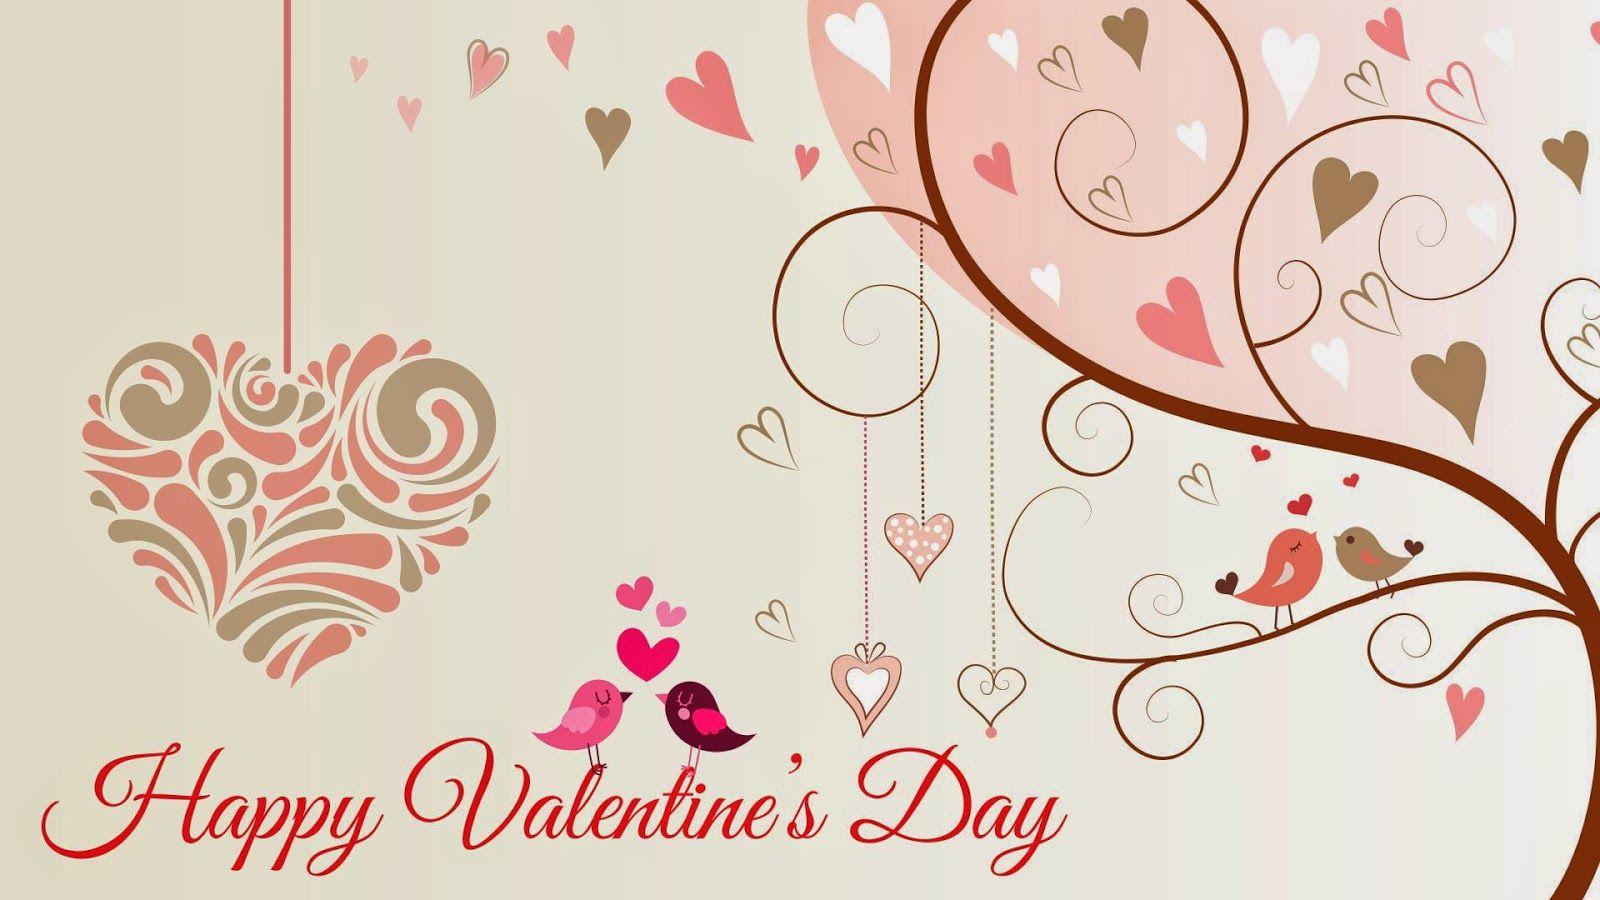 HD Valentine's Day Image and Hindi Songs 2018